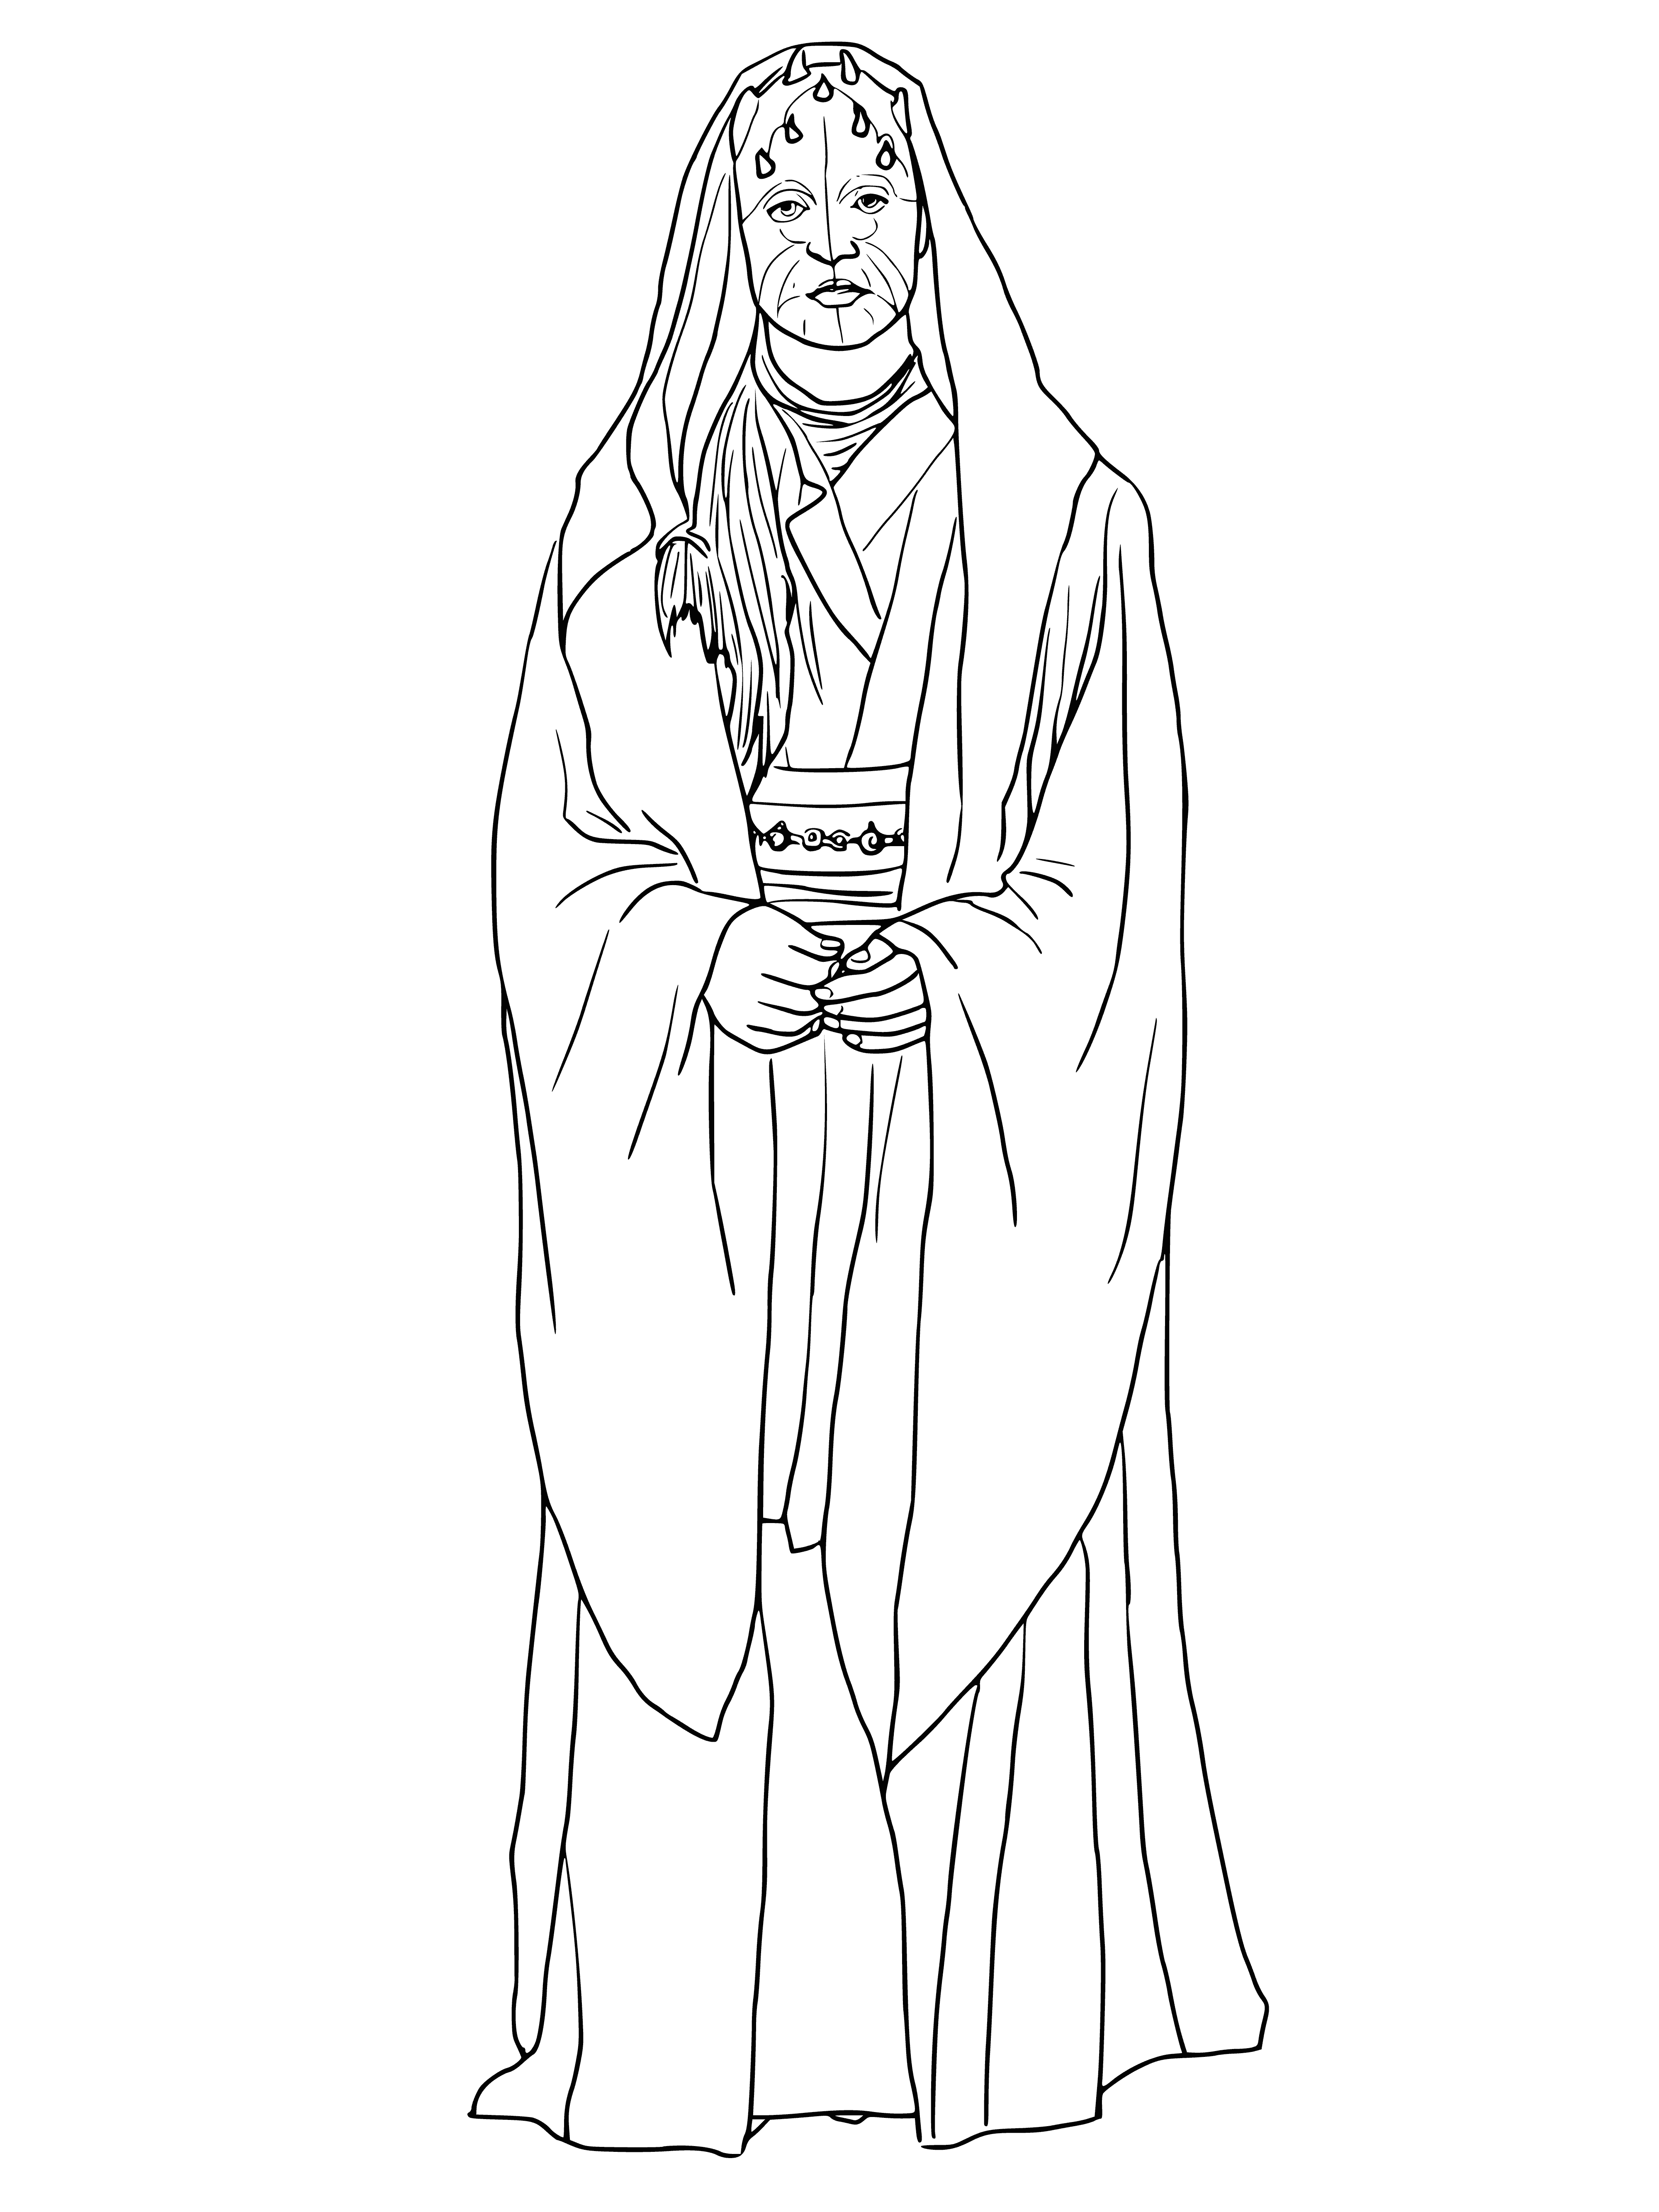 coloring page: Jedi Master Iit Cat inspects a star map w/ a lightsaber in one hand, pointing w/ the other to something of interest.